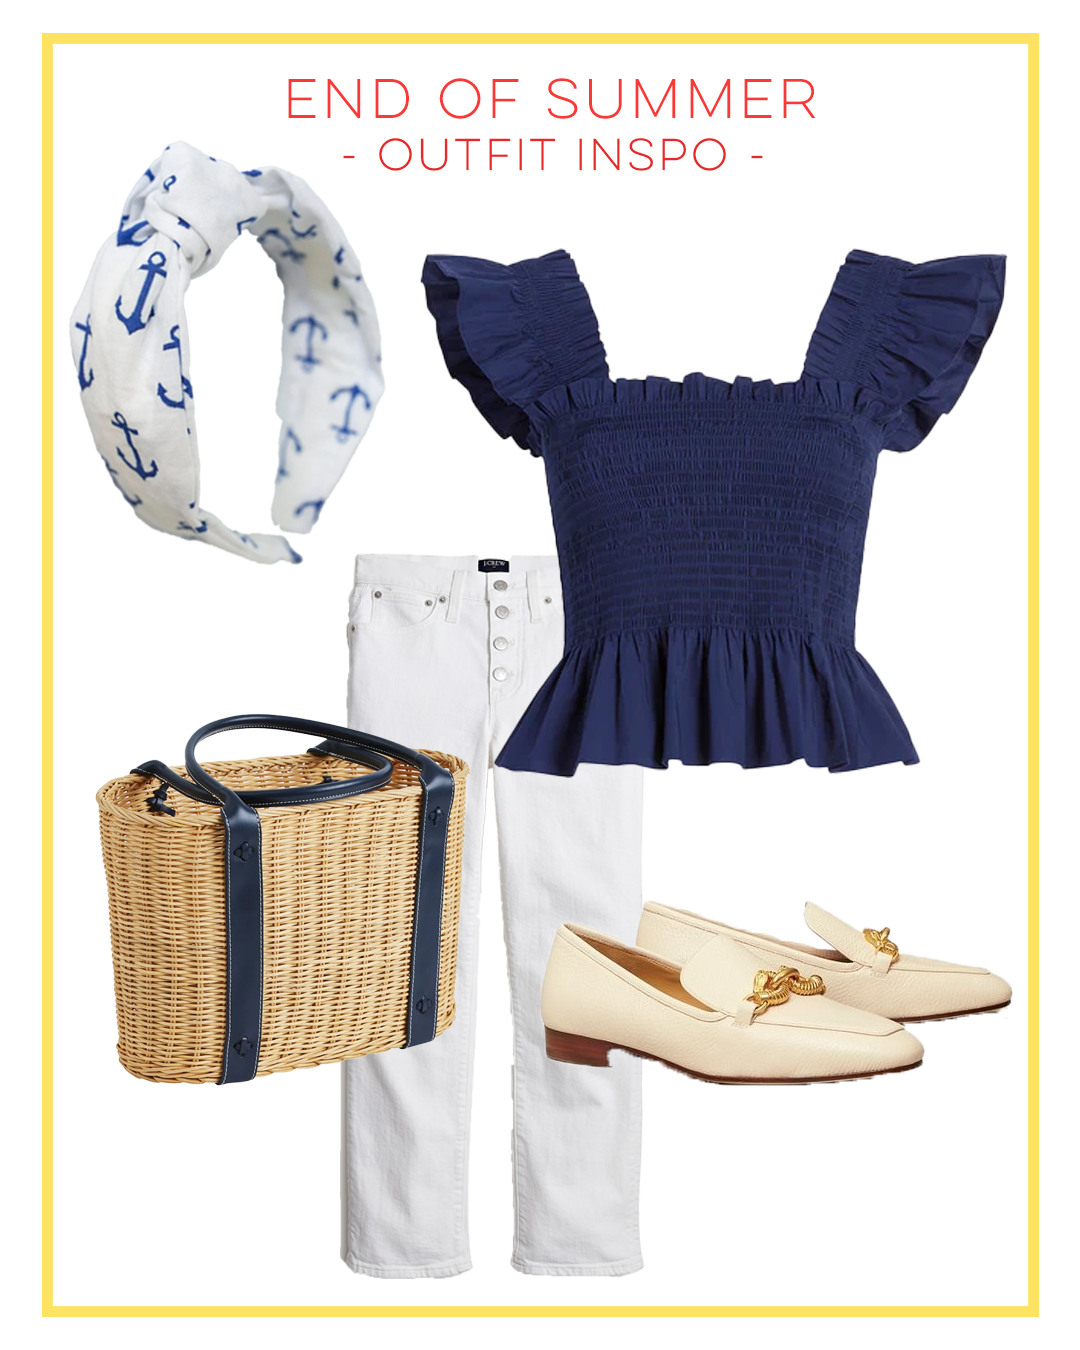 End of Summer Outfit Inspiration, Hill House Home Blue Linen Top, White Jeans, Anchor Headband, Basket Bag 